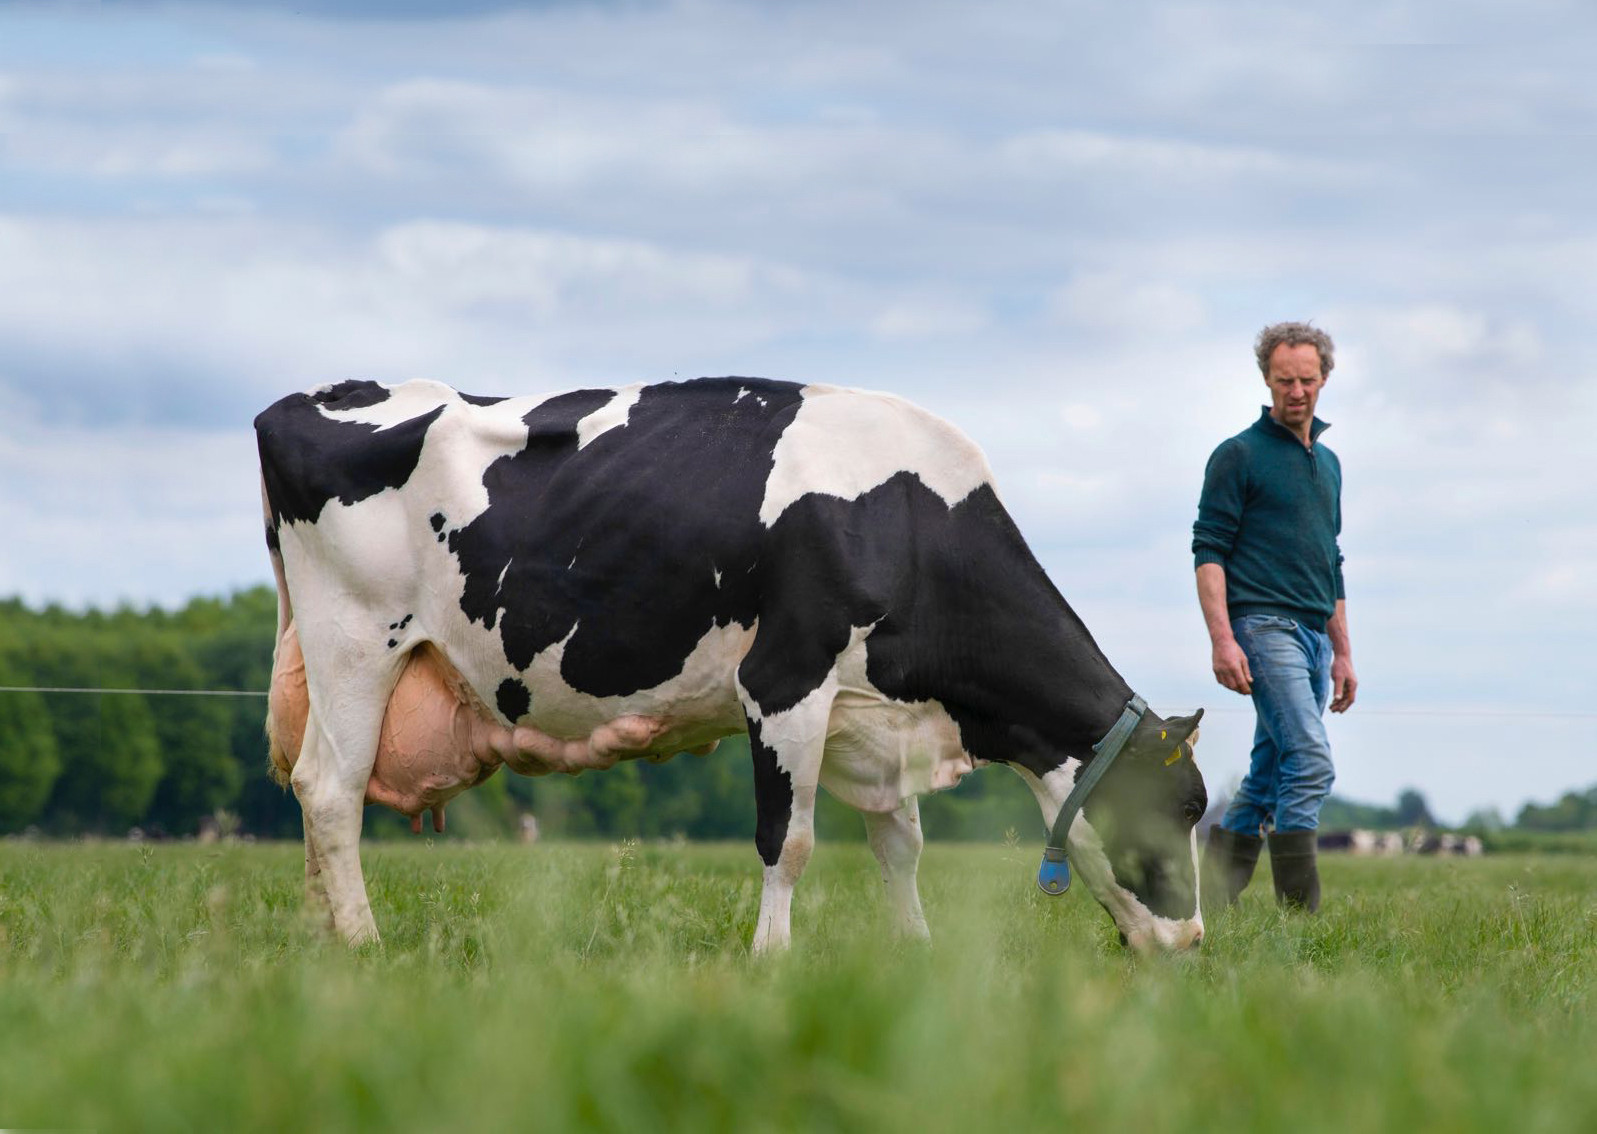 Thousands of Euros additional yield per cow with longer lifespan